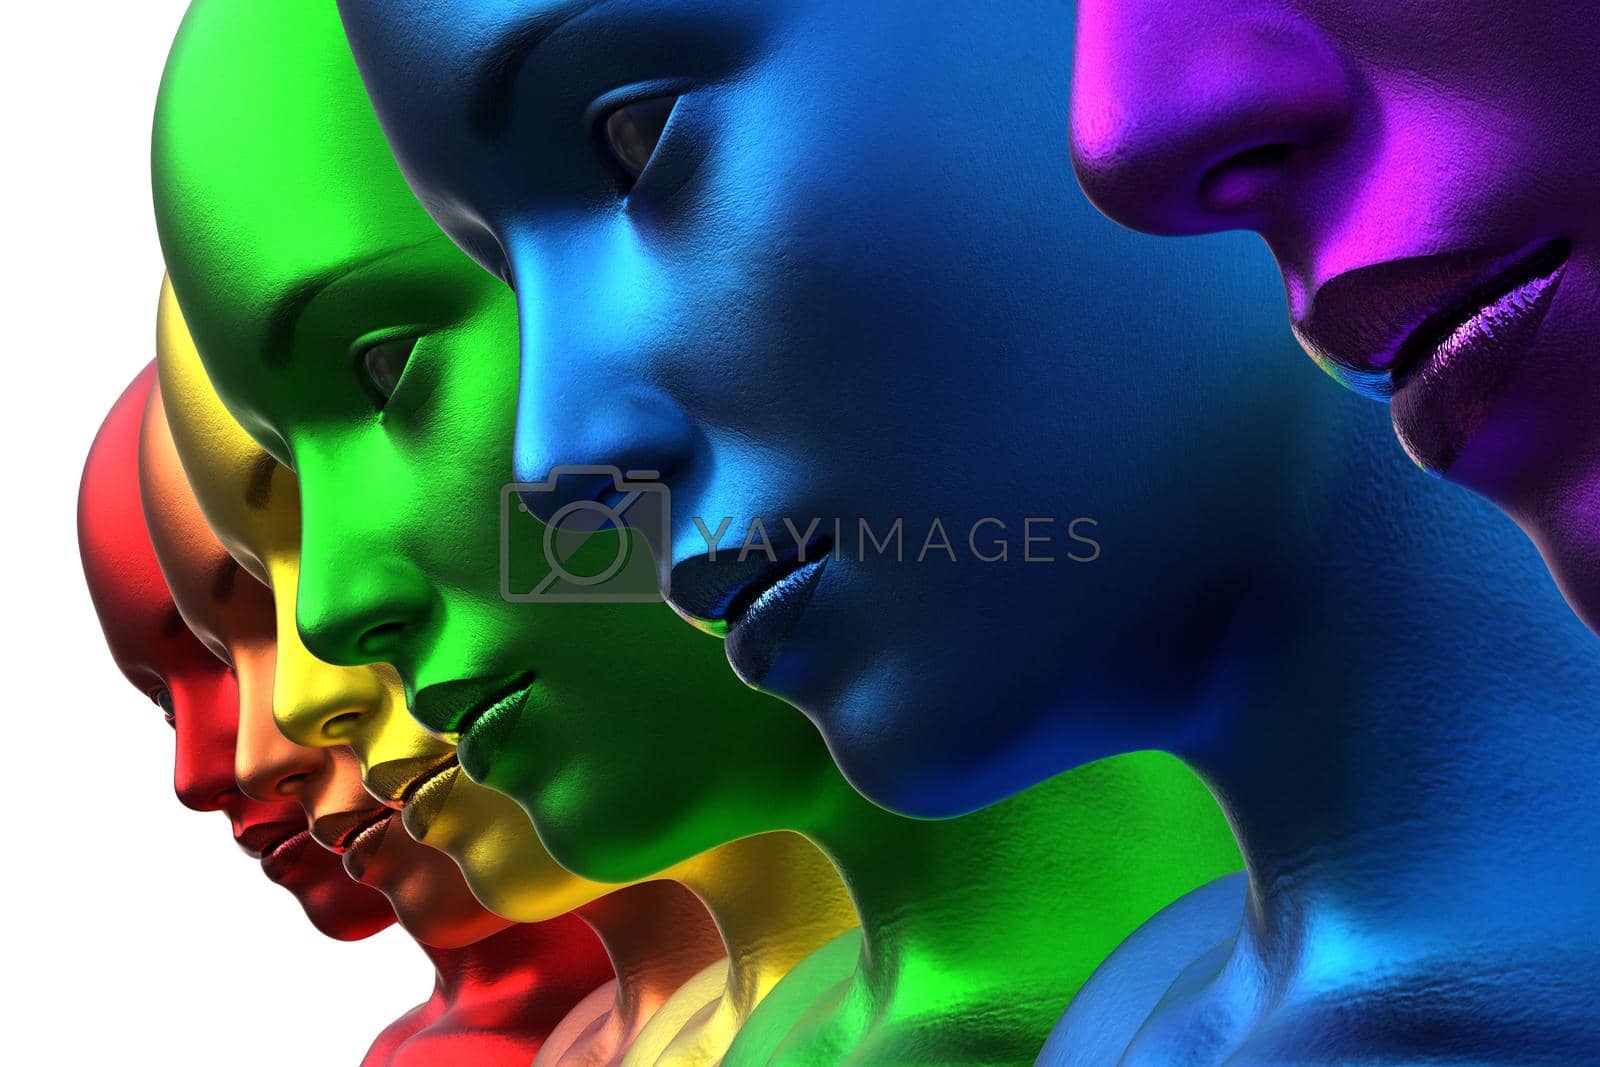 Royalty free image of 3d illustration. Row of multicolored women. Rainbow. metallic. by mrwed54